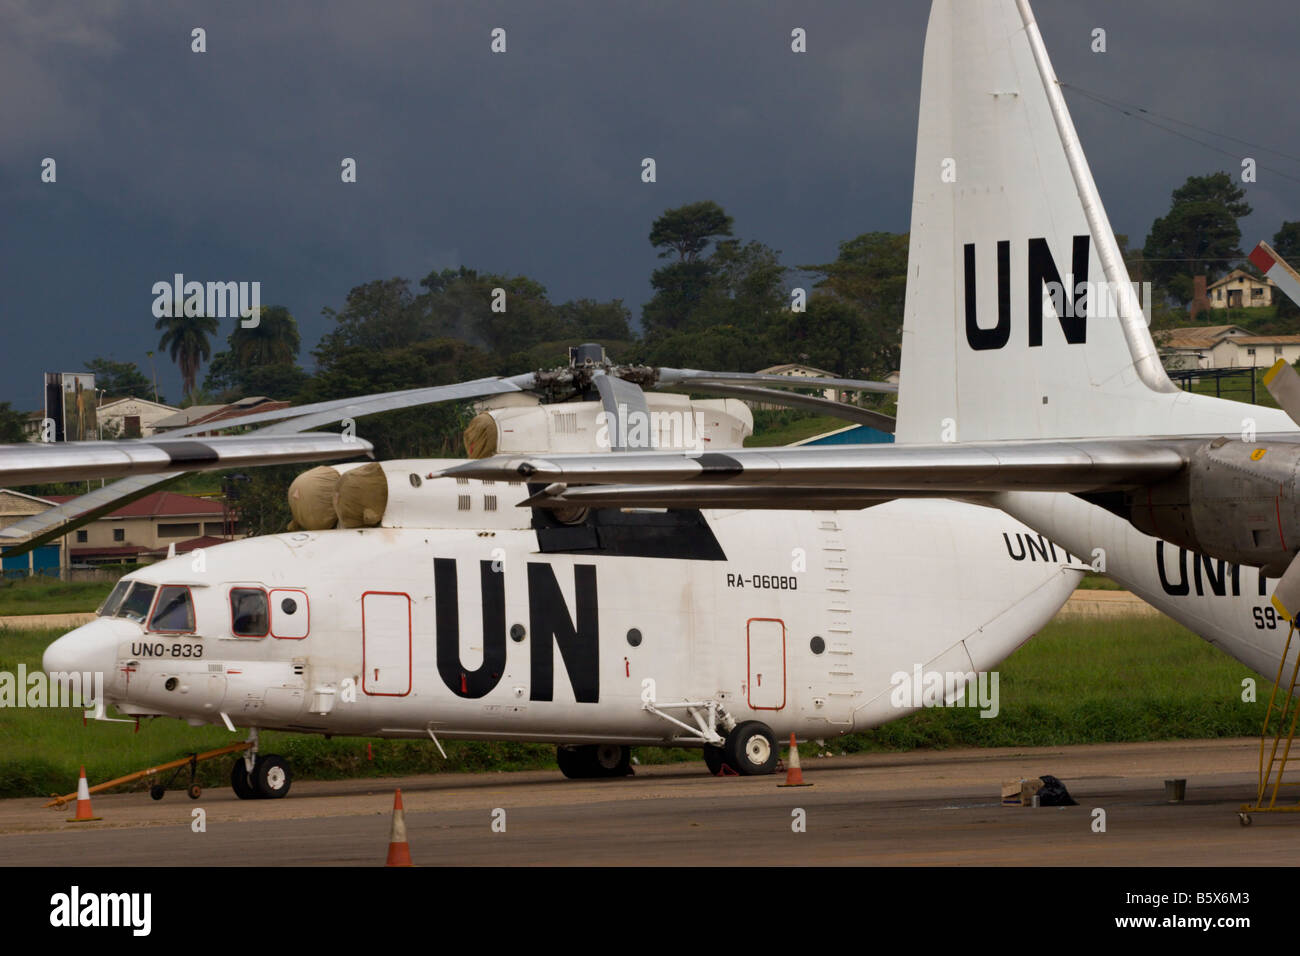 UN united nations helicopter Mil-26 aircraft hercules turboprop africa relief support airlift Stock Photo